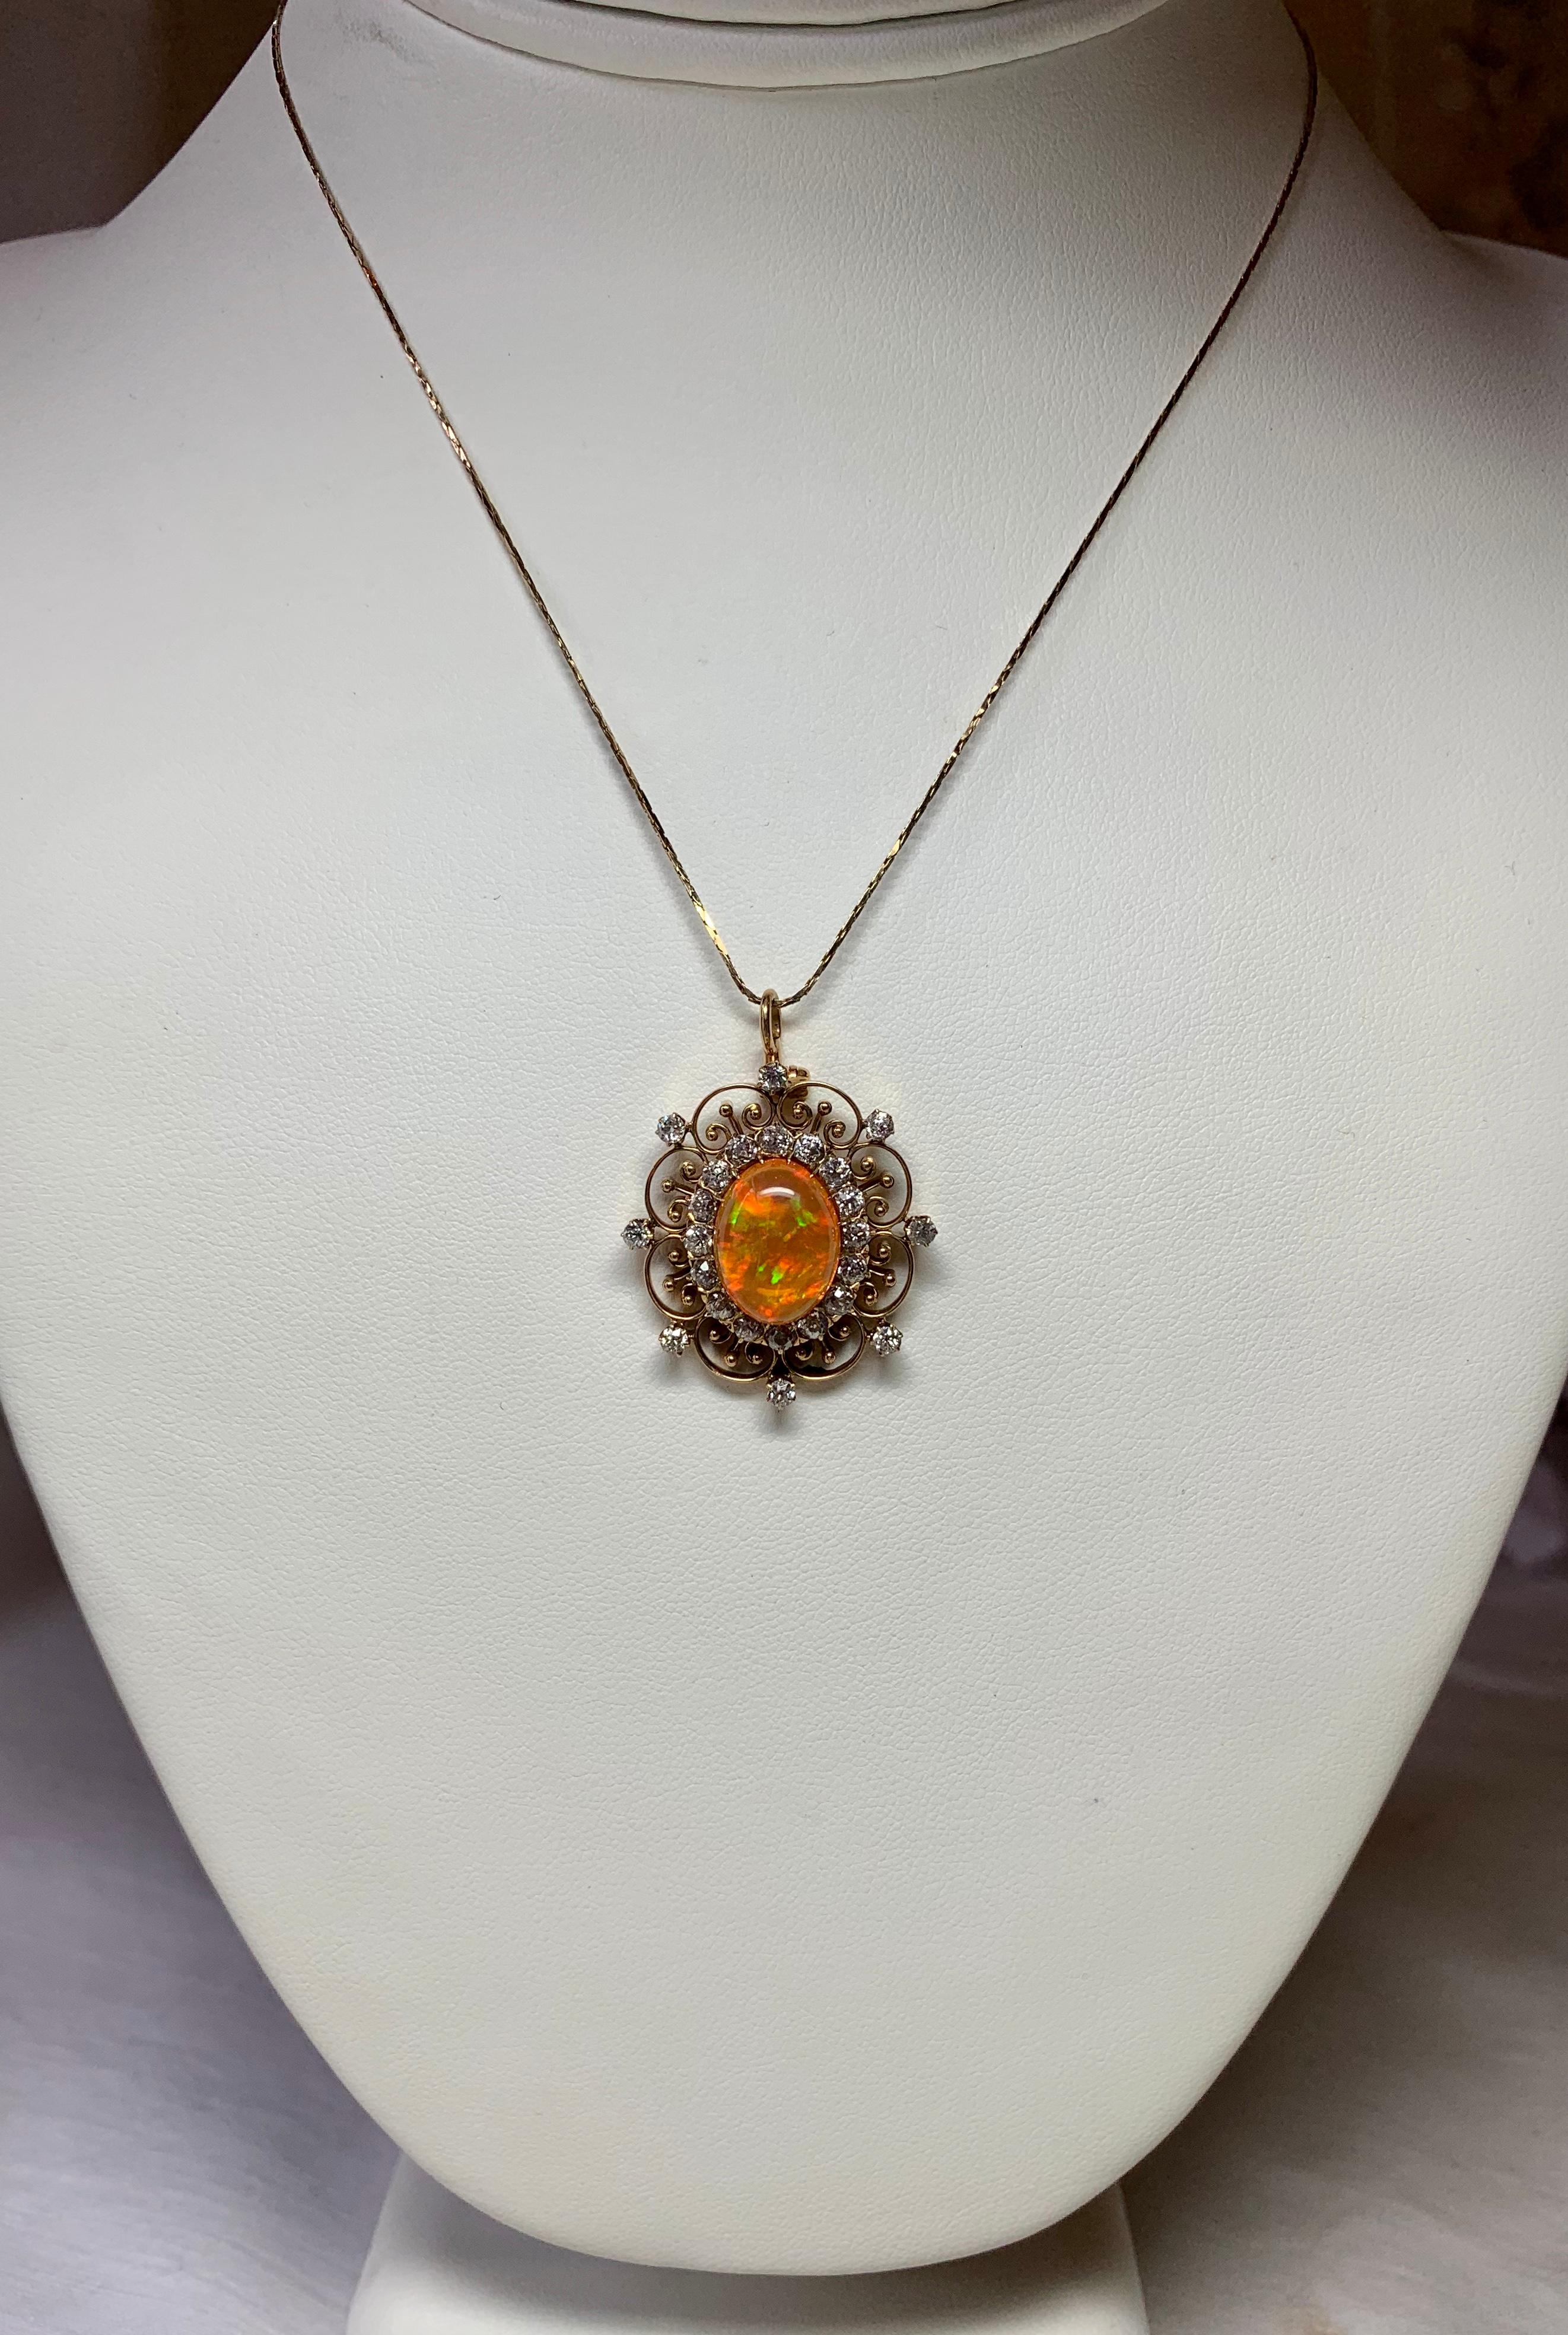 A stunning Antique Art Deco - Victorian Pendant with a gorgeous central 2.4 Carat Opal accented by 23 absolutely radiant Old Mine Cut Diamonds totaling 2.0 Carats.  The oval opal cabochon gem has vivid orange with green accents - stunning!  The